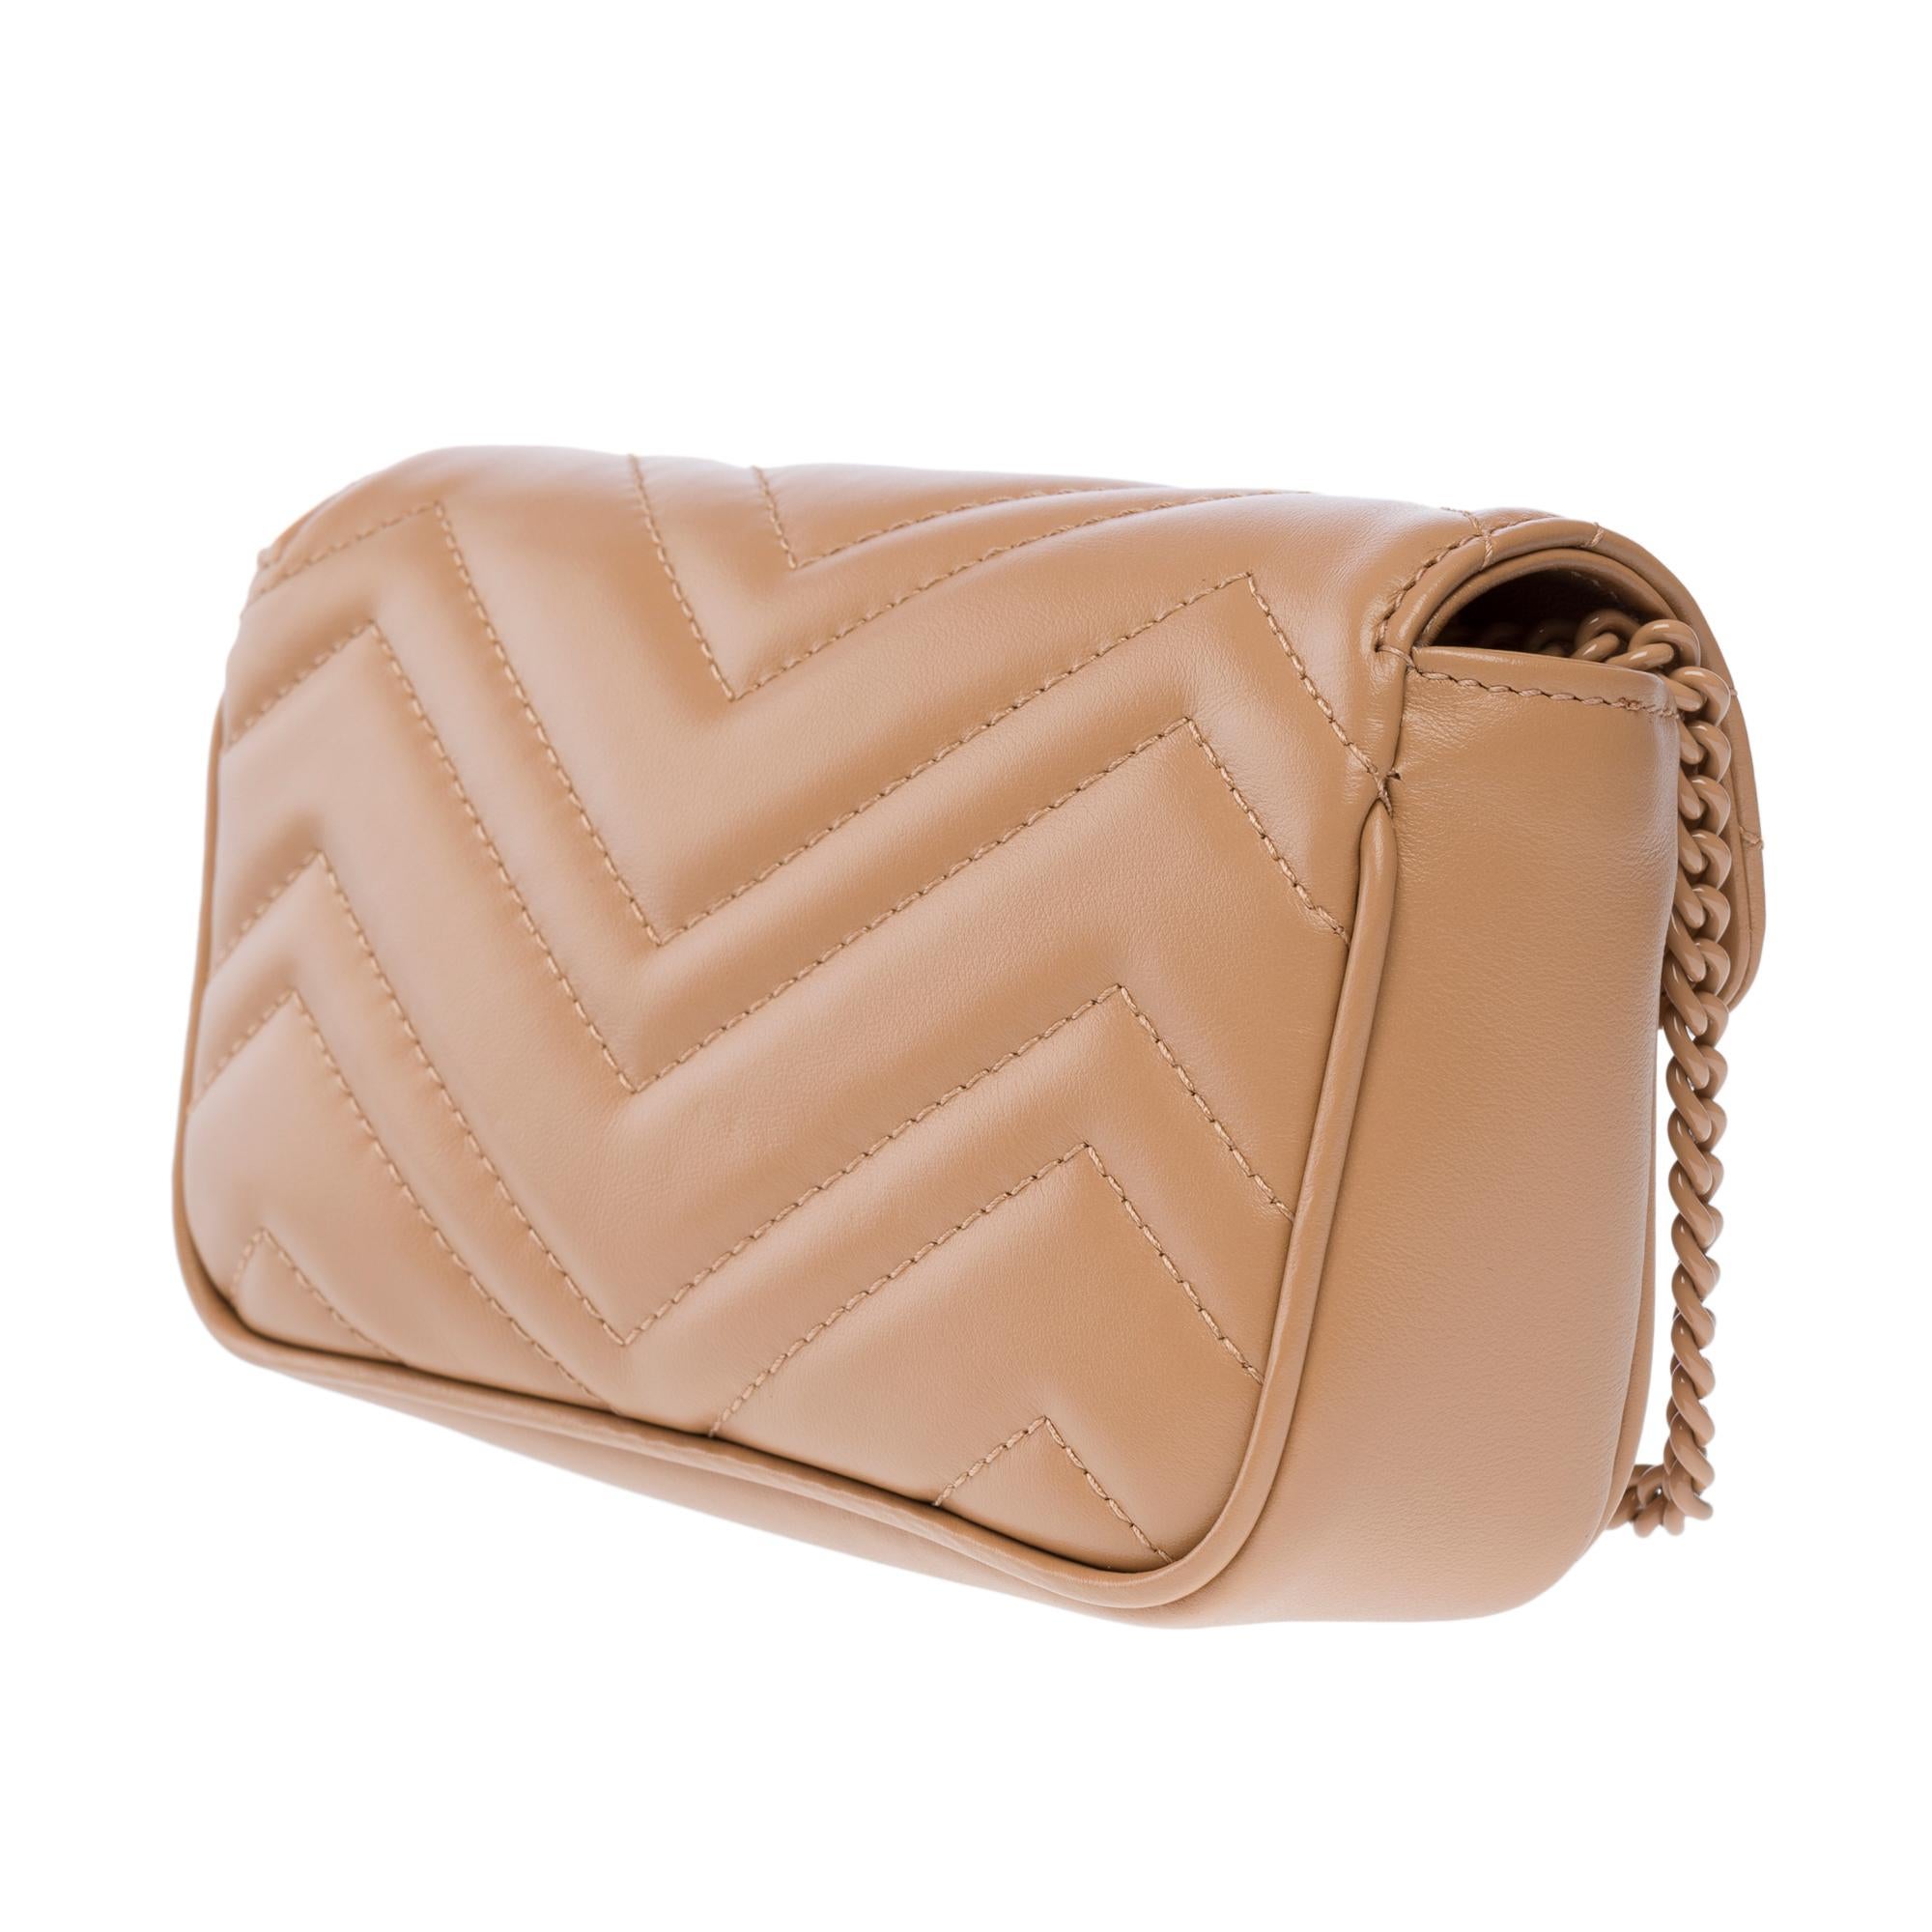 Gucci GG Marmont Mini shoulder bag in beige quilted leather , BHW For Sale 1